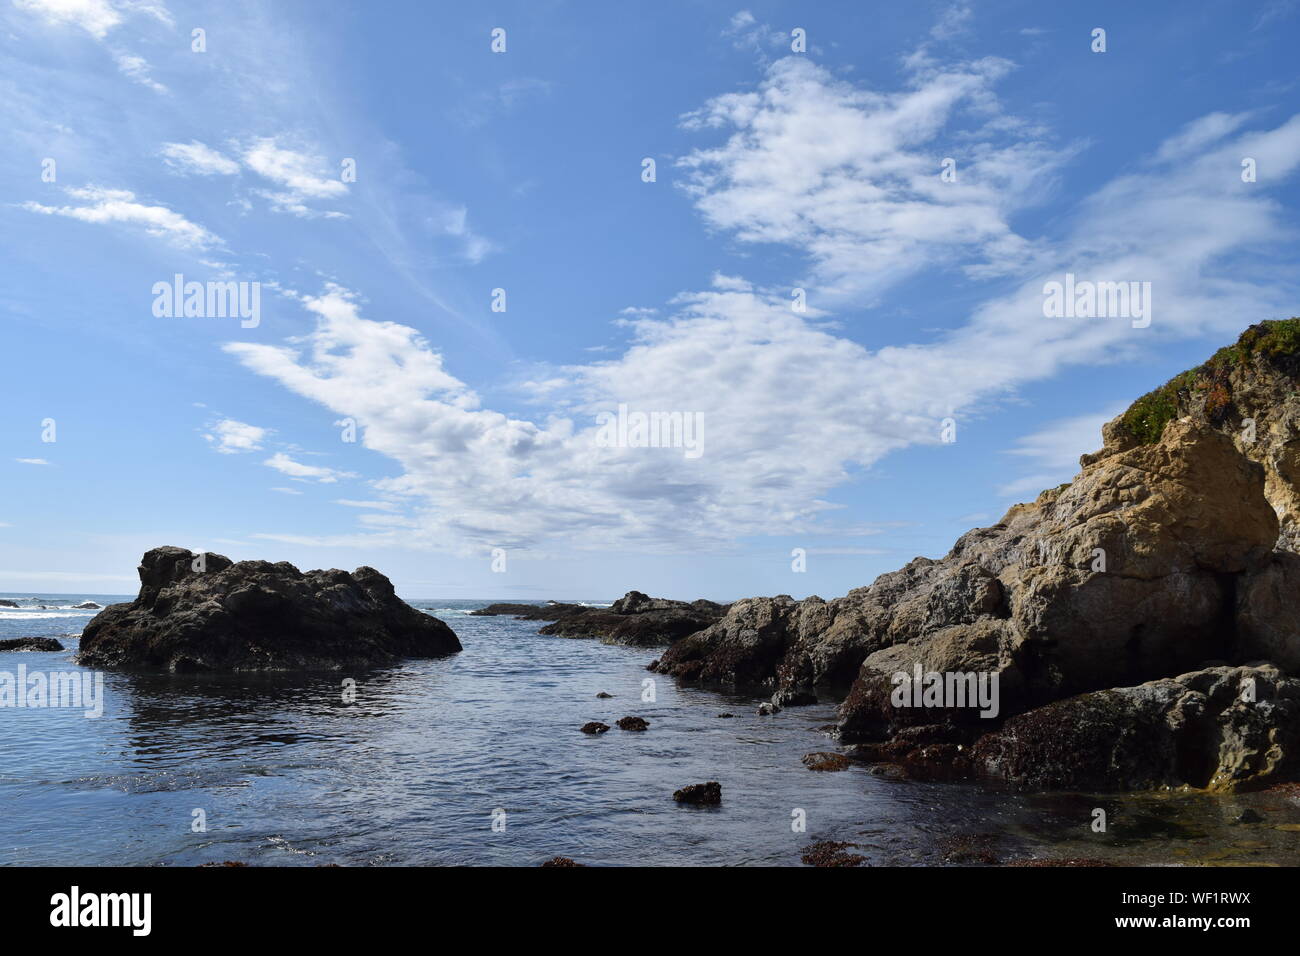 Scenic View Of Sea Against Cloudy Sky Stock Photo